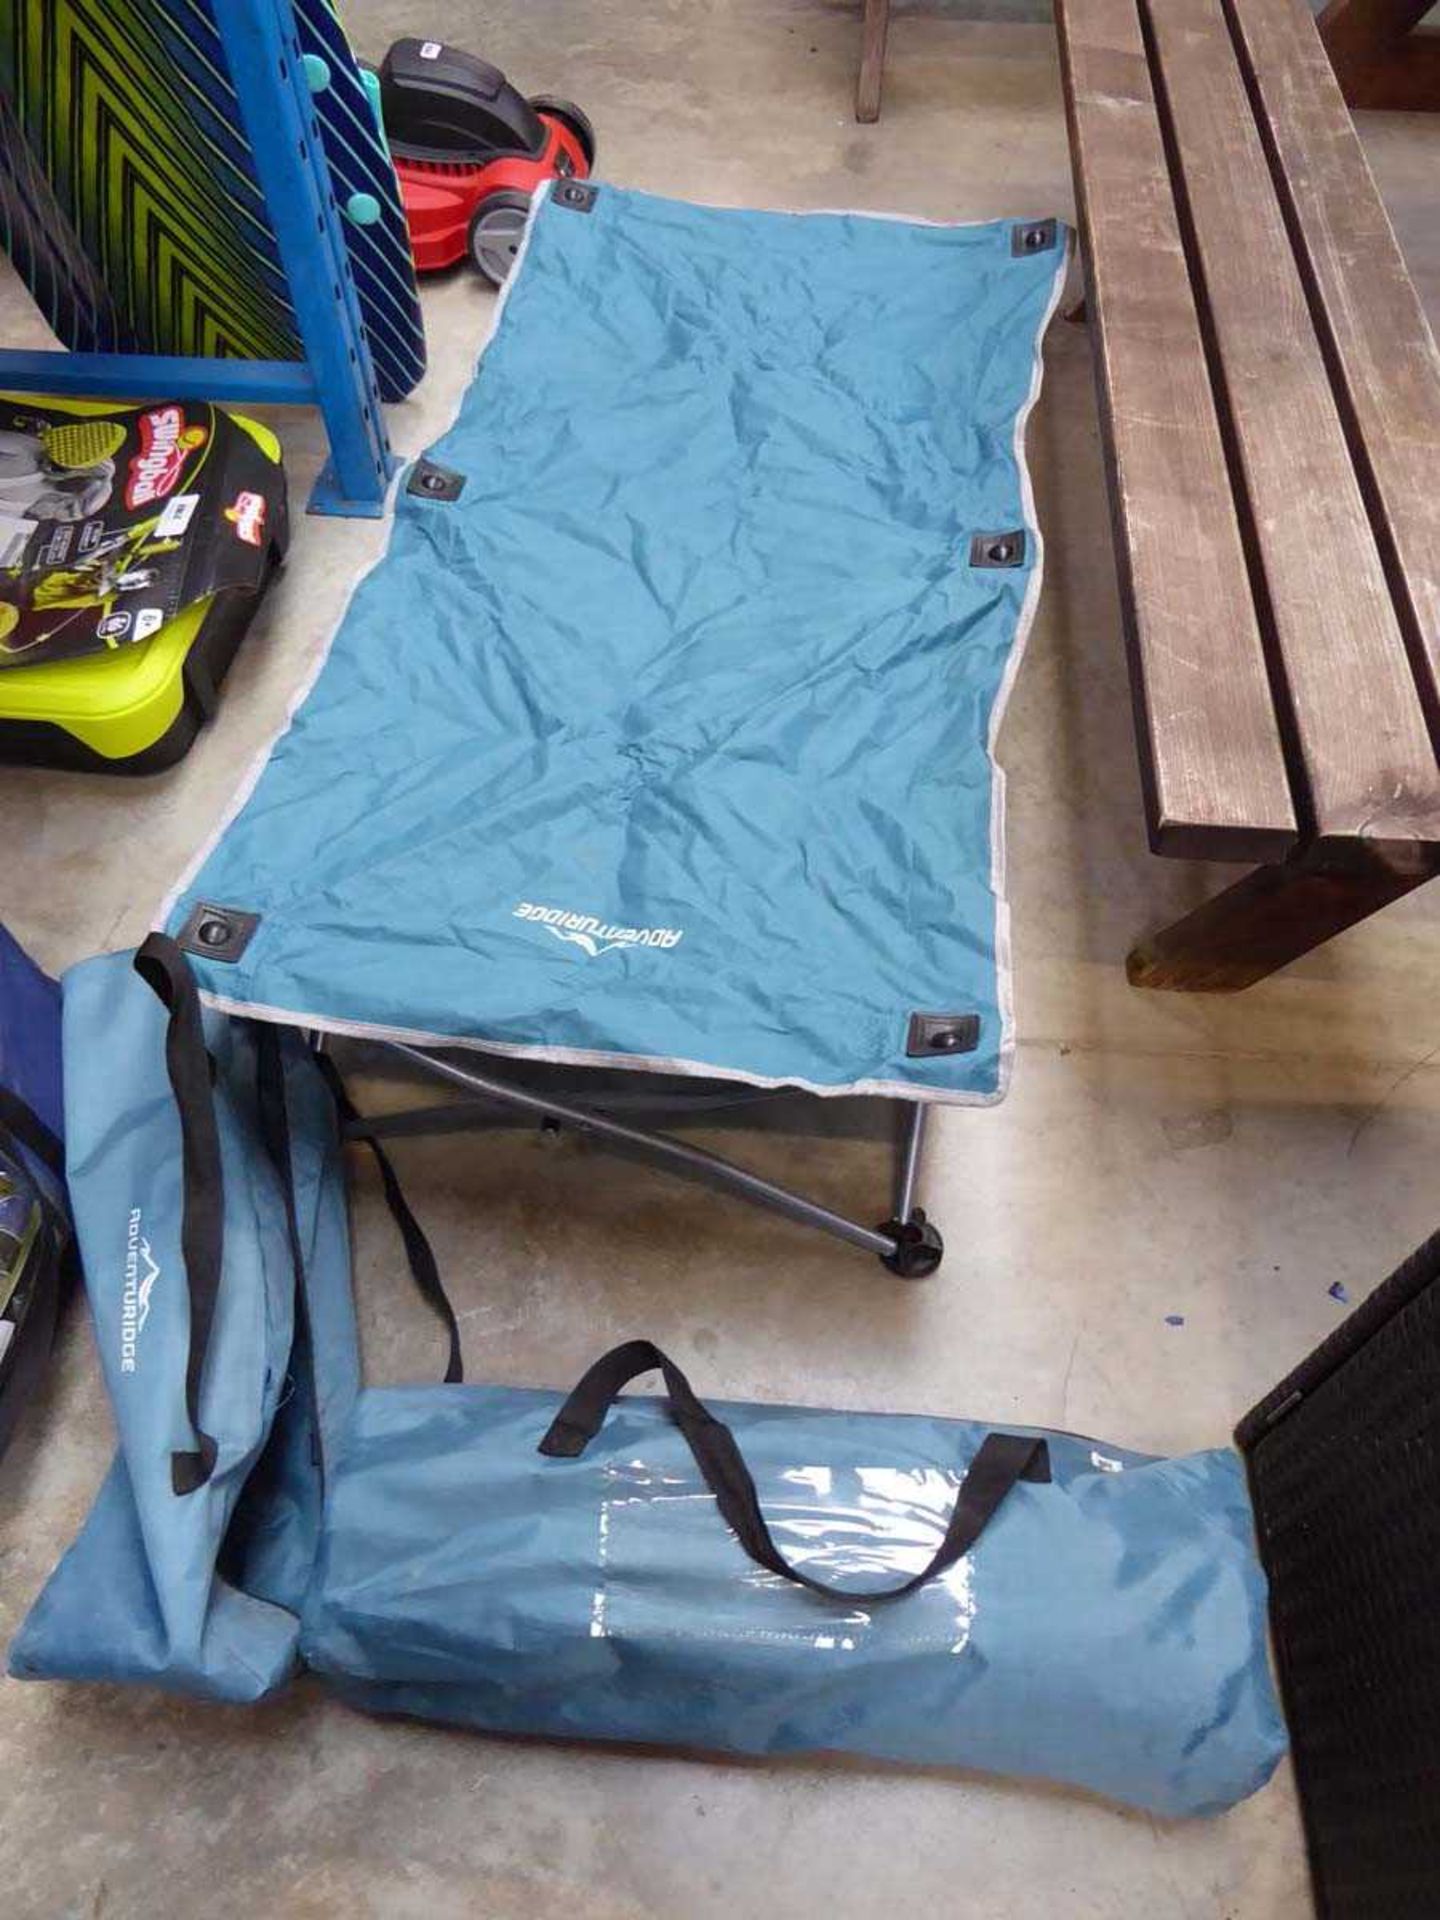 2 bags containing outdoor camping chairs